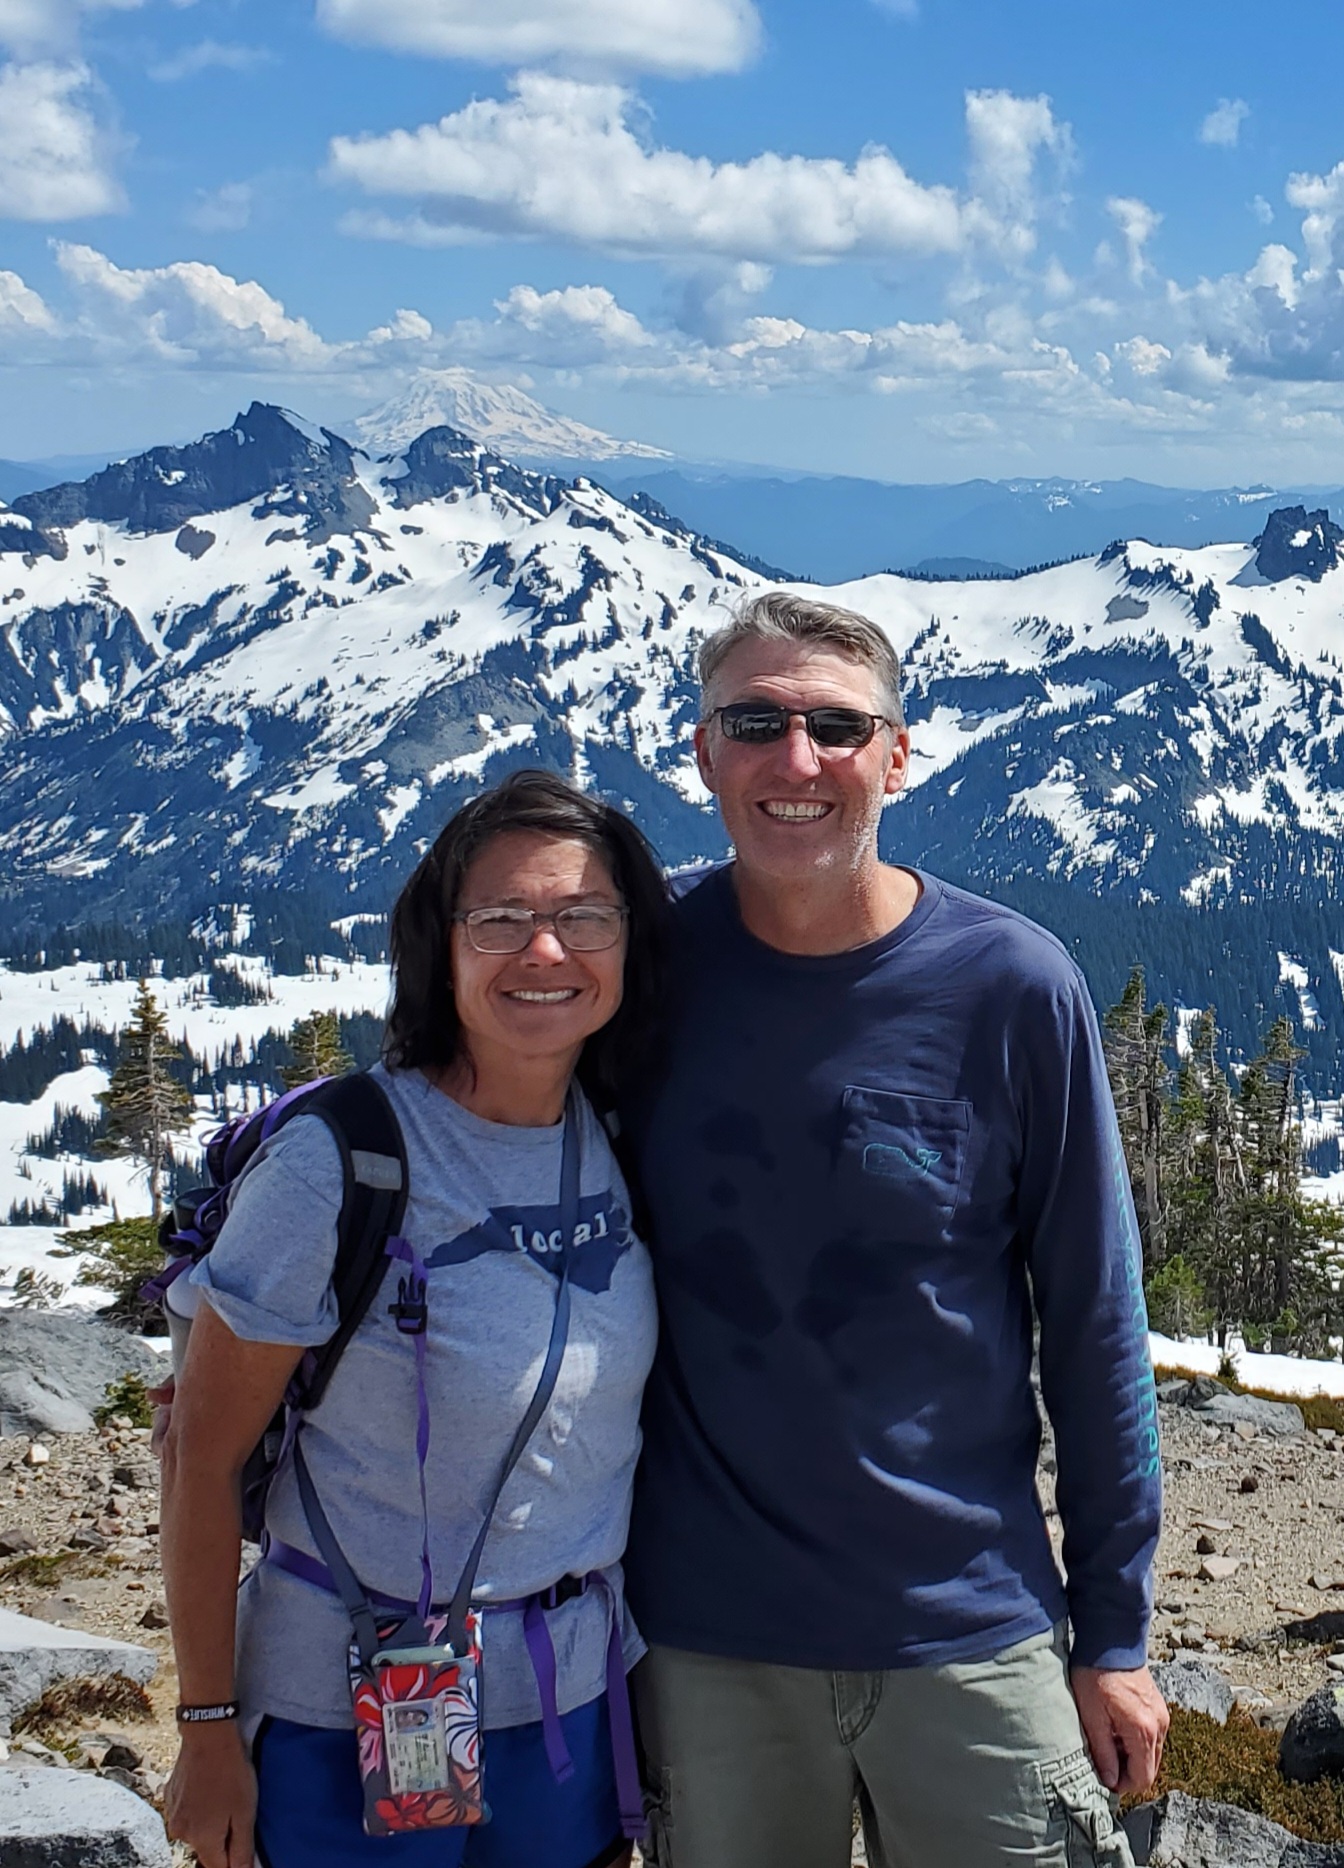 Mt. Rainier (Washington) - A rare clear day for Kathy and me. In the background you can see Mt. Saint Helens.